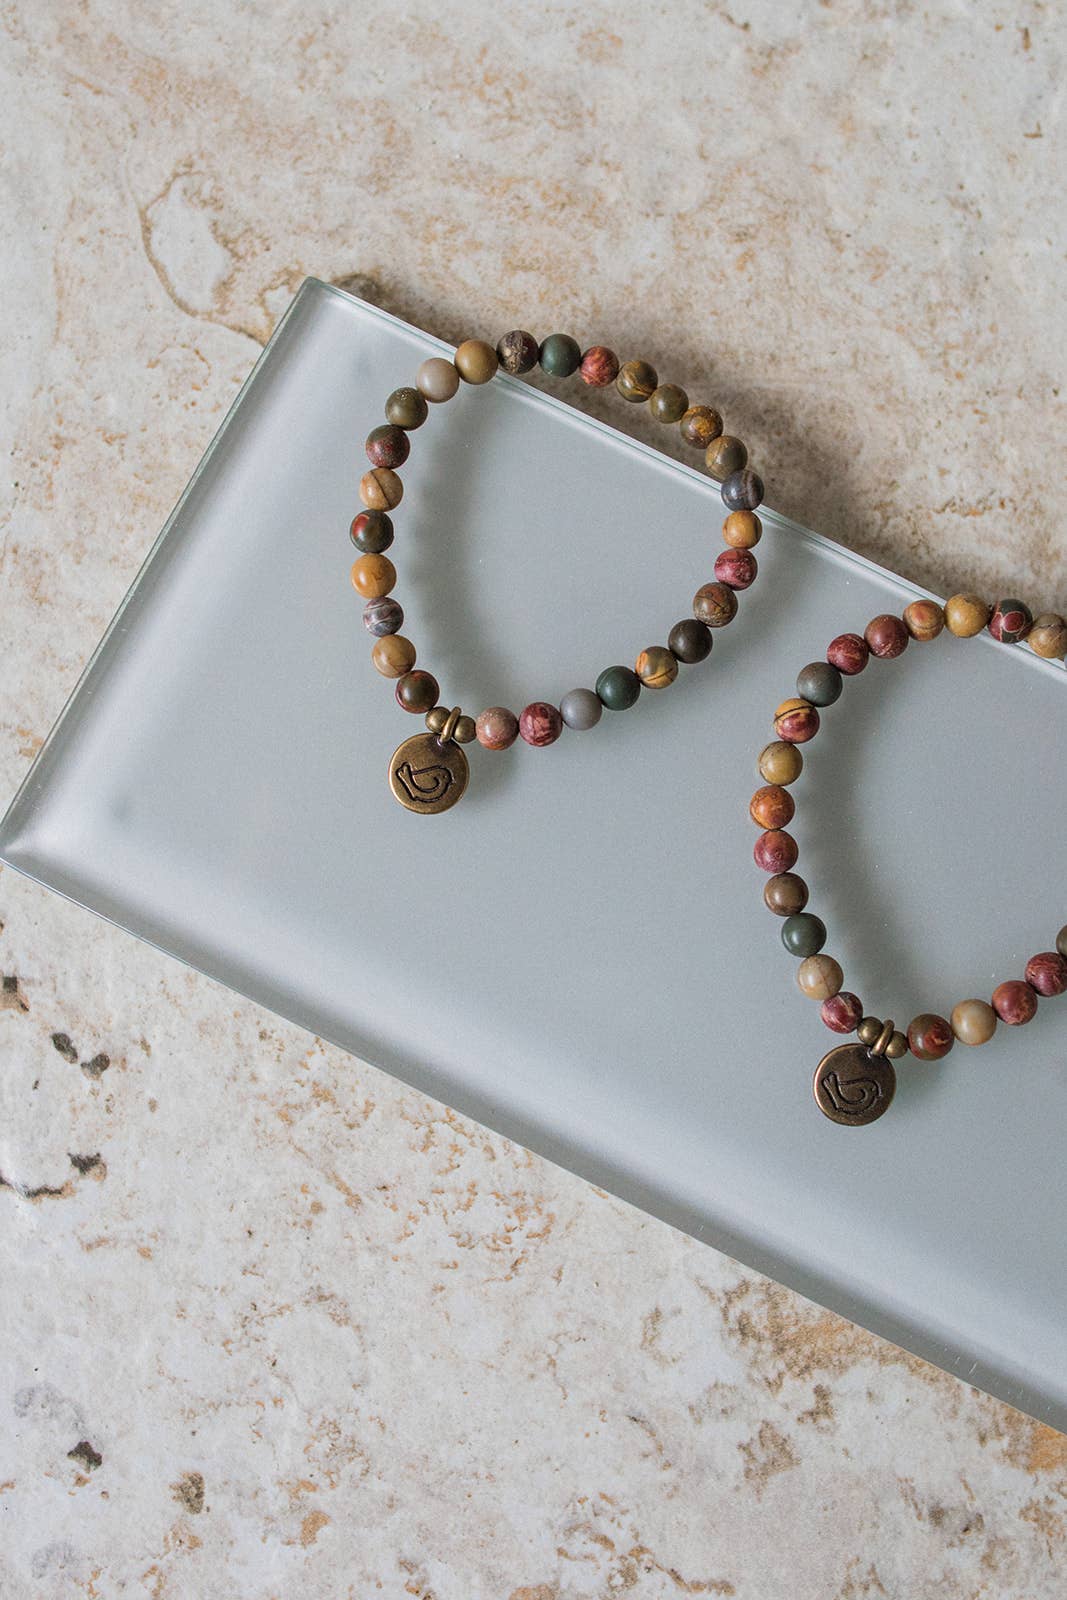 Two Birds + One Stone Snap n' Share BFF Bracelet Red Creek